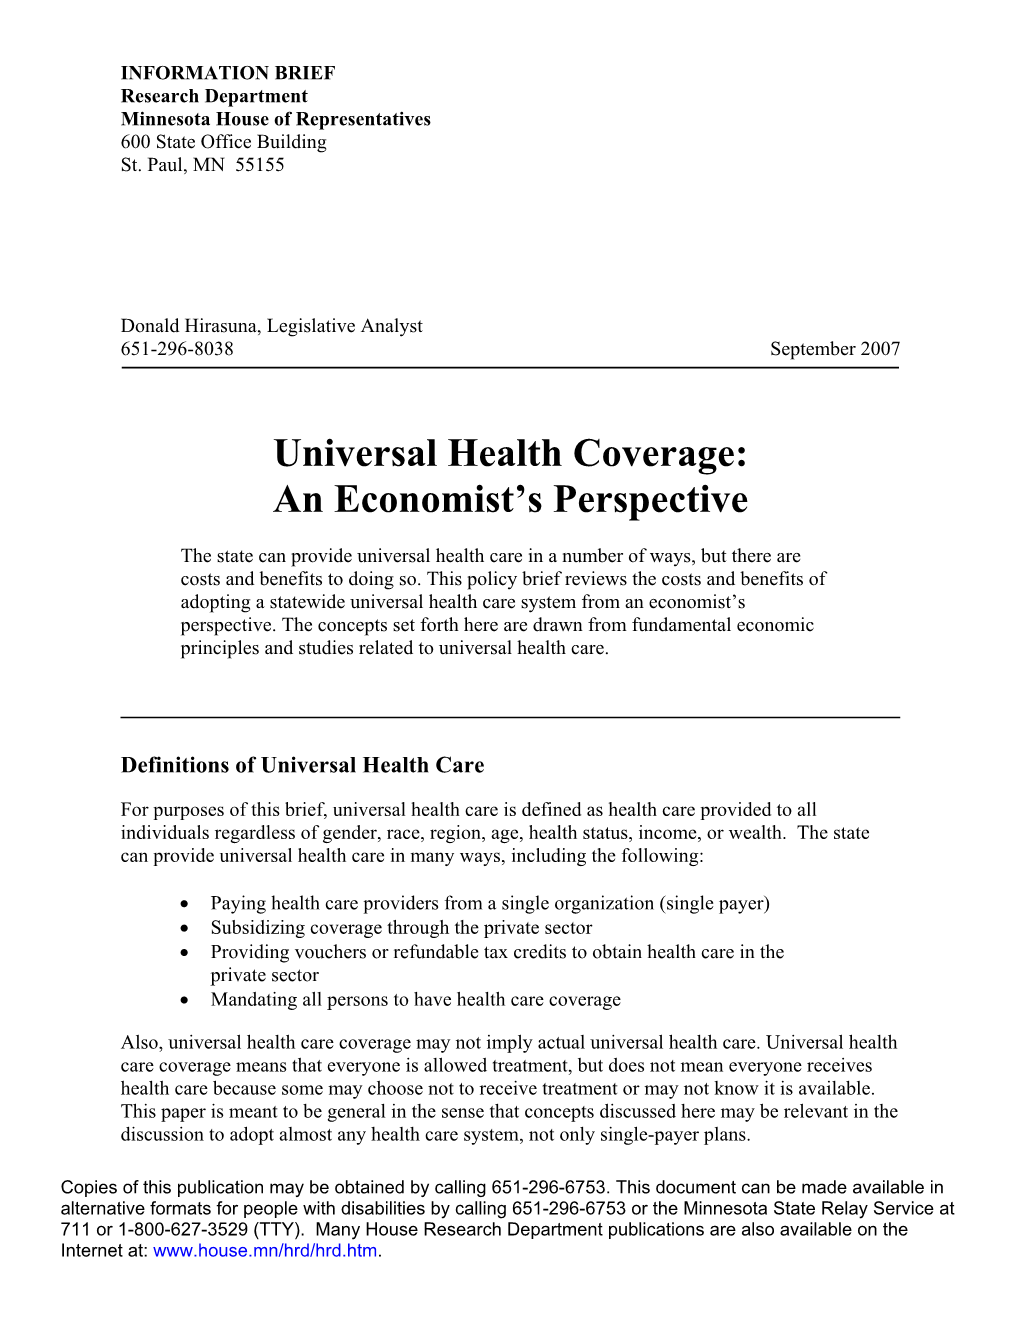 Universal Health Care Coverage: an Economist's Perspective